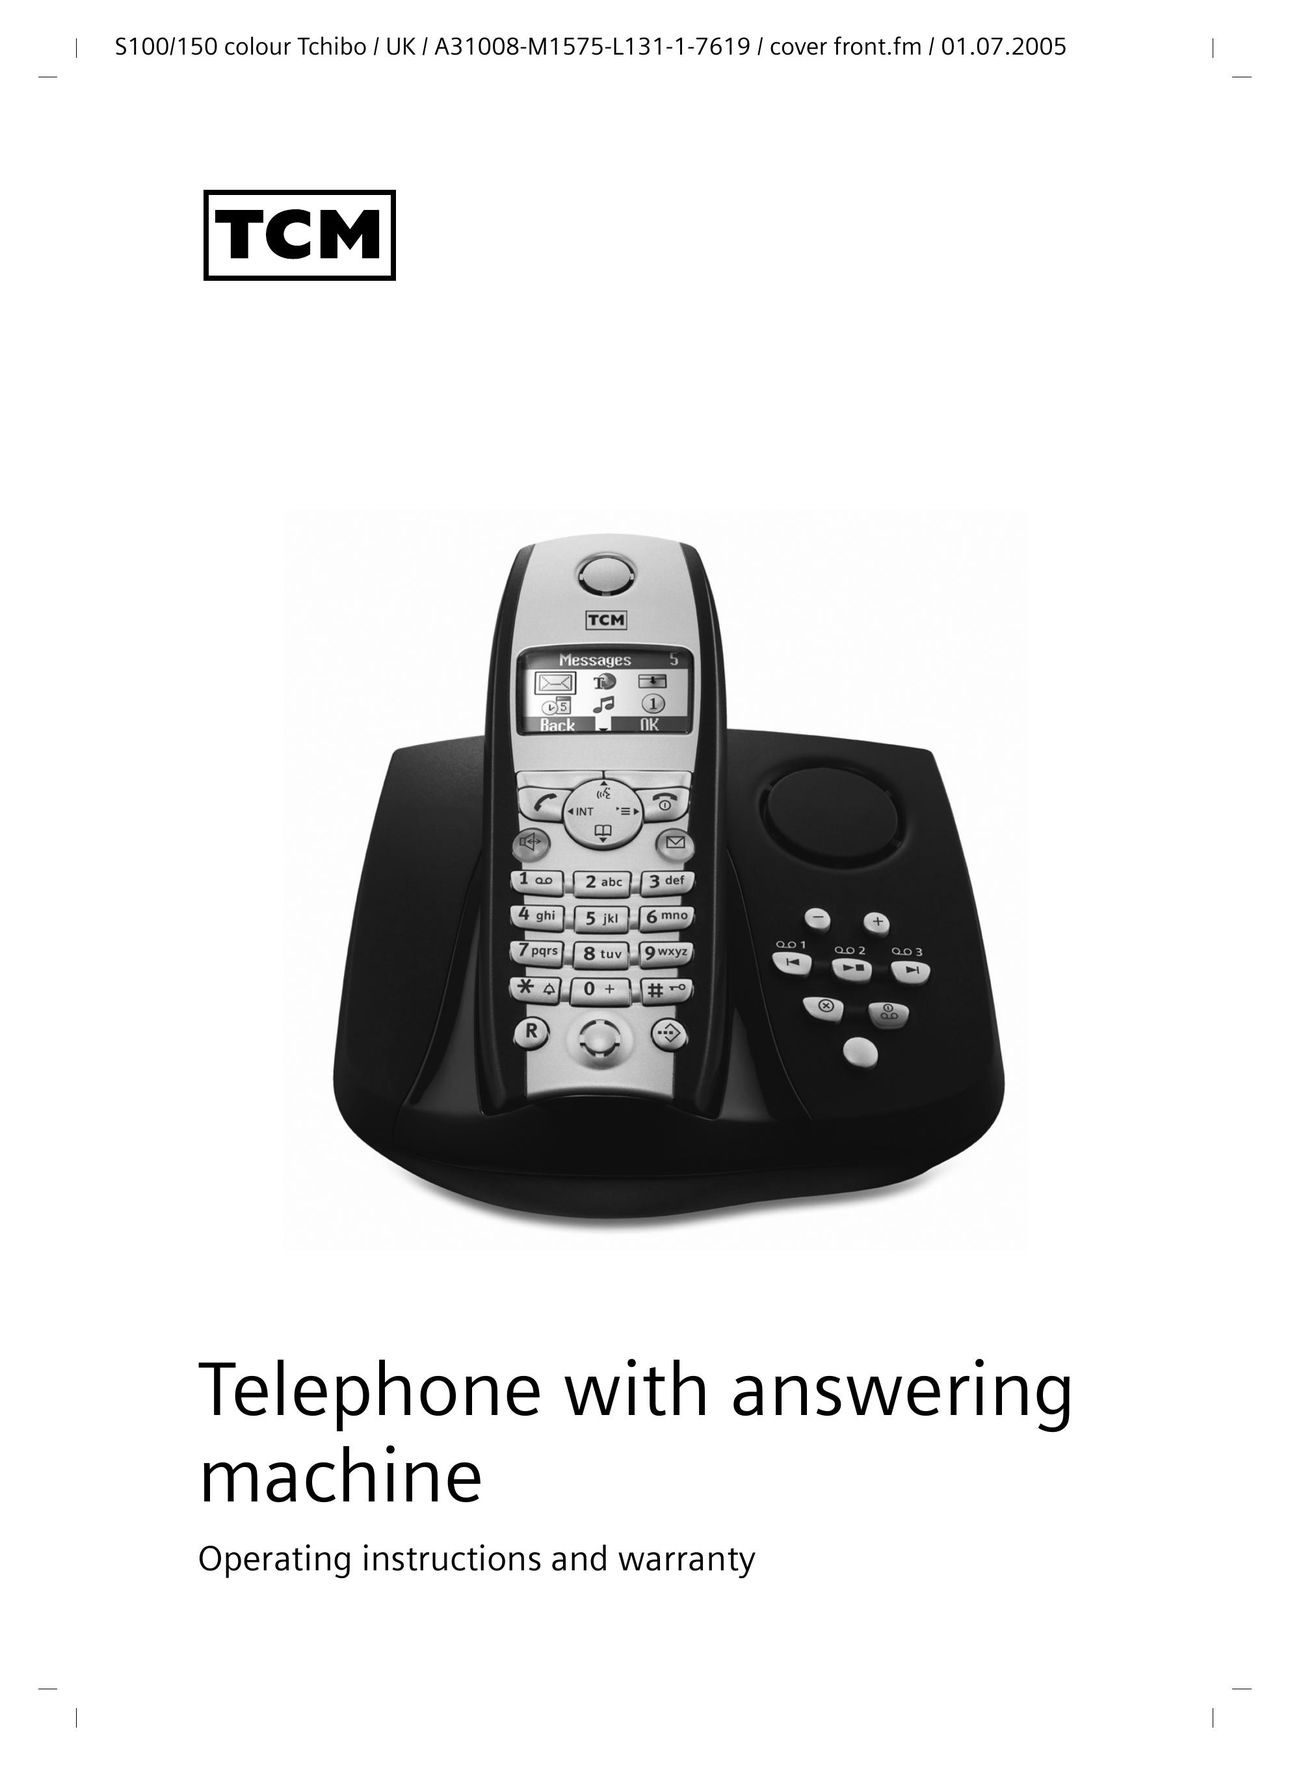 Sony Telephone with Answering Machine Telephone User Manual